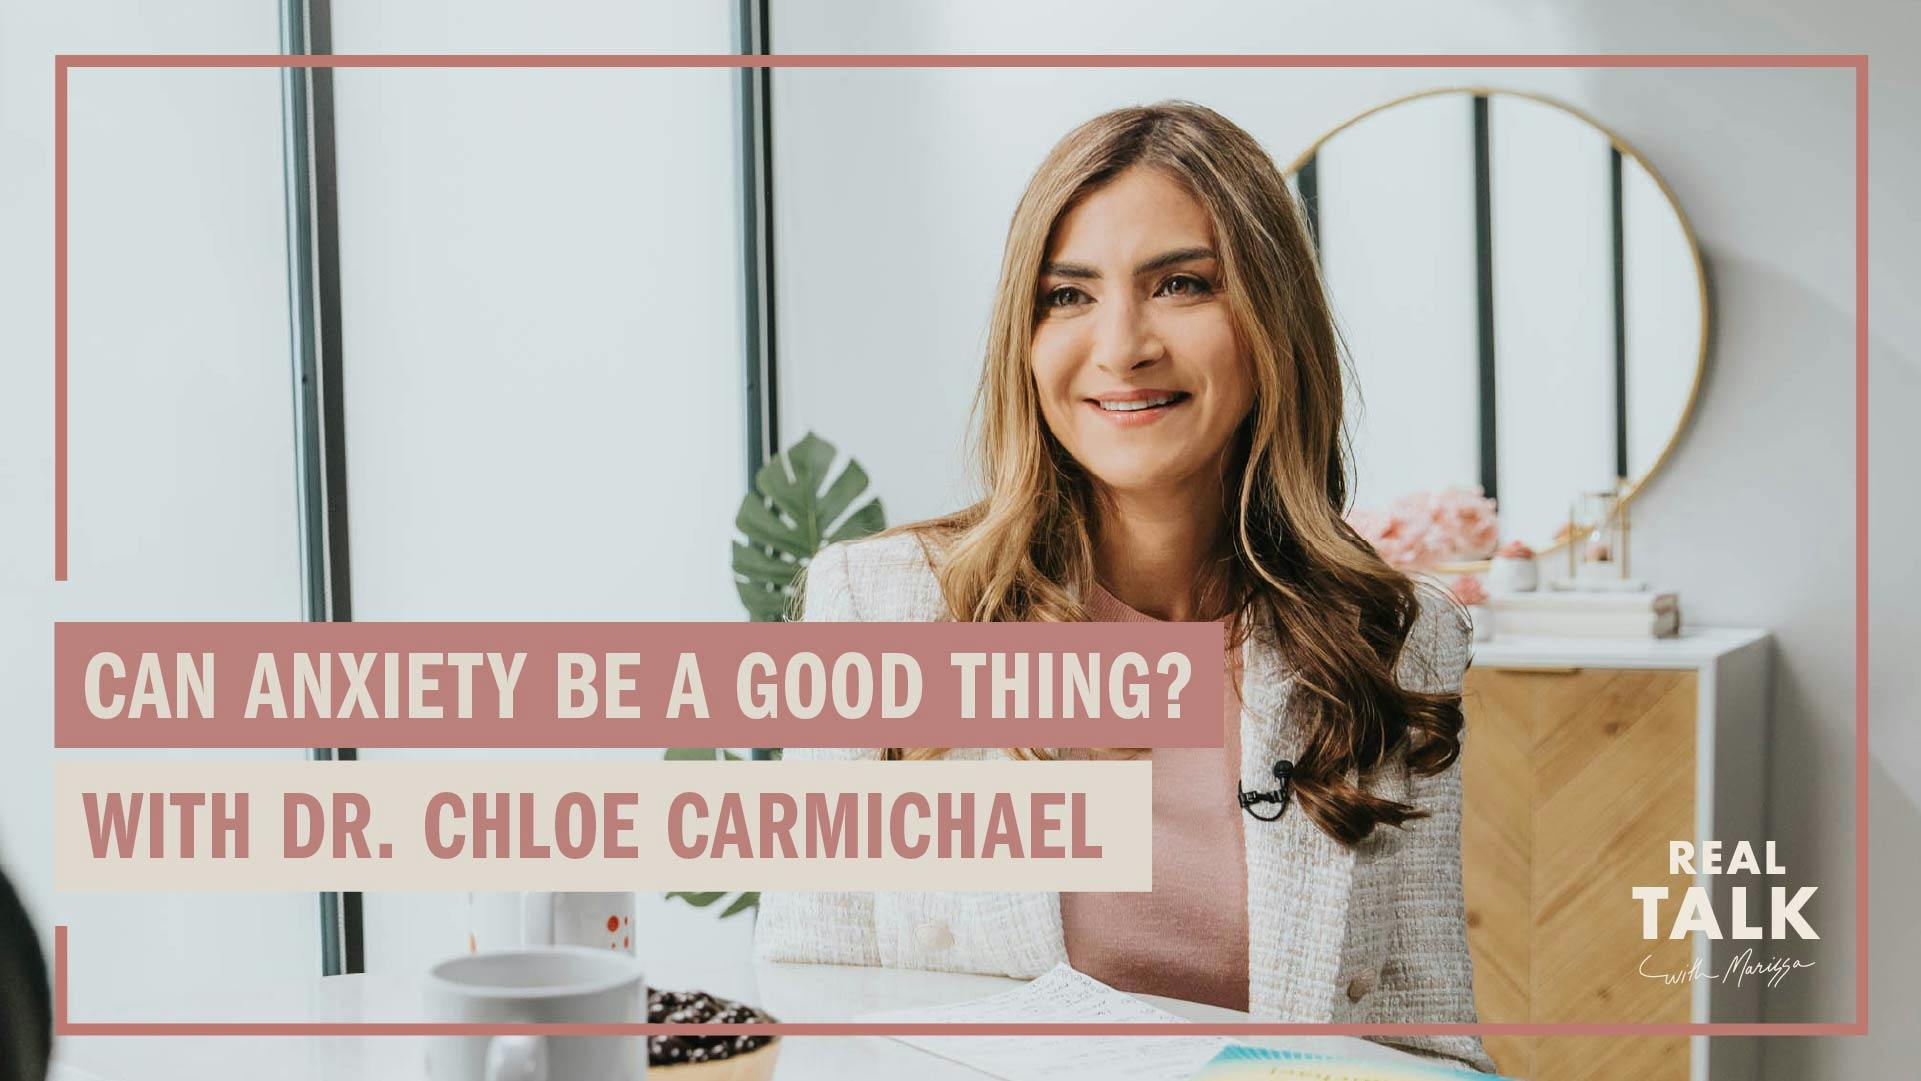 Can Anxiety Be a Good Thing? with Dr. Chloe Carmichael